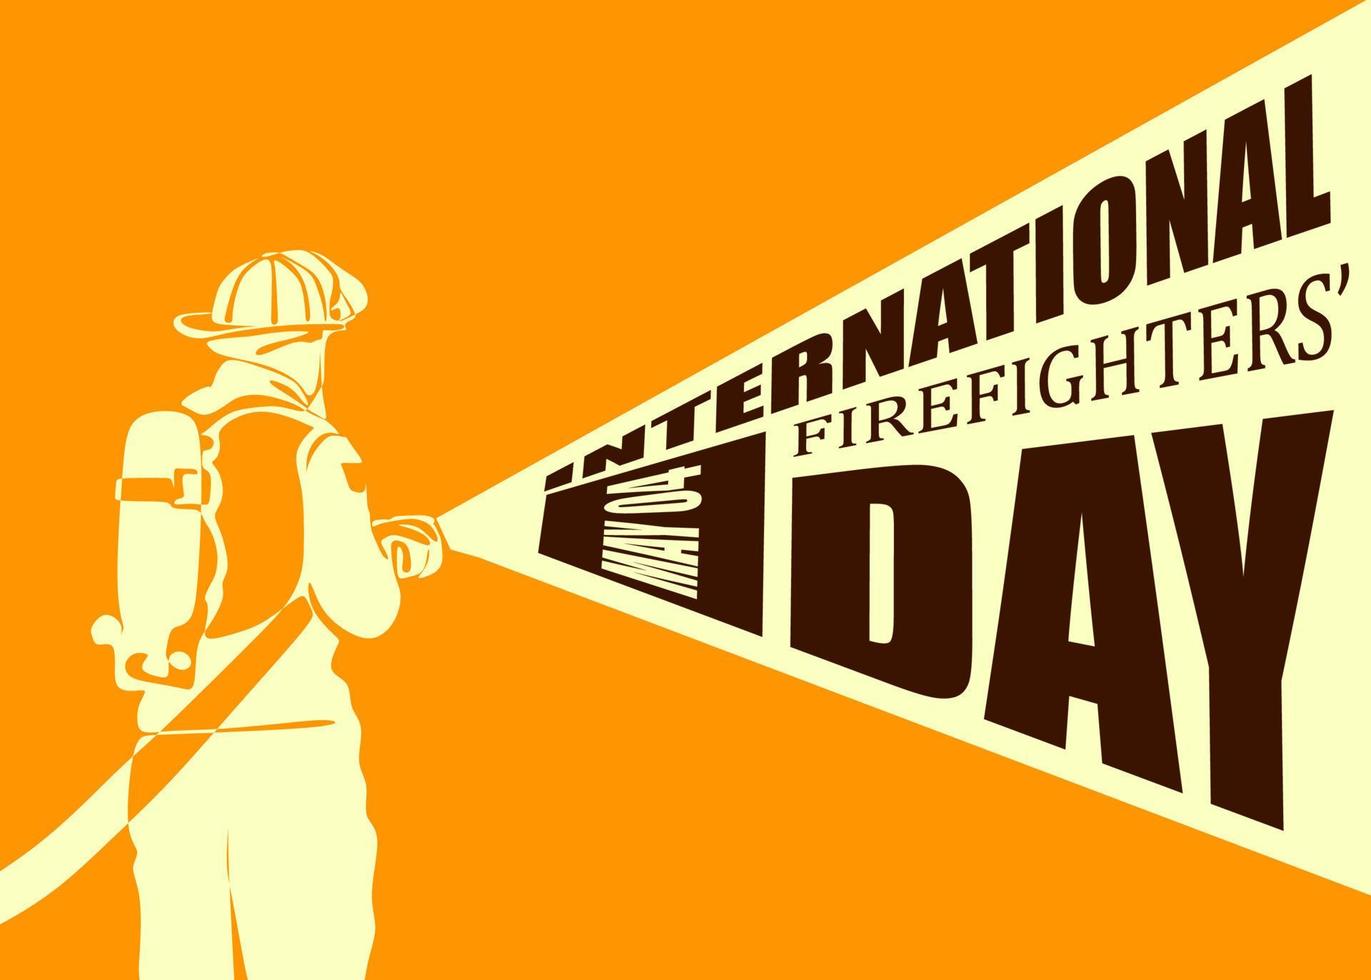 International firefighters day. Firefighter silhouette vector illustration, as a banner, poster or template for international firefighters day with lettering. firefighter extinguishes fire